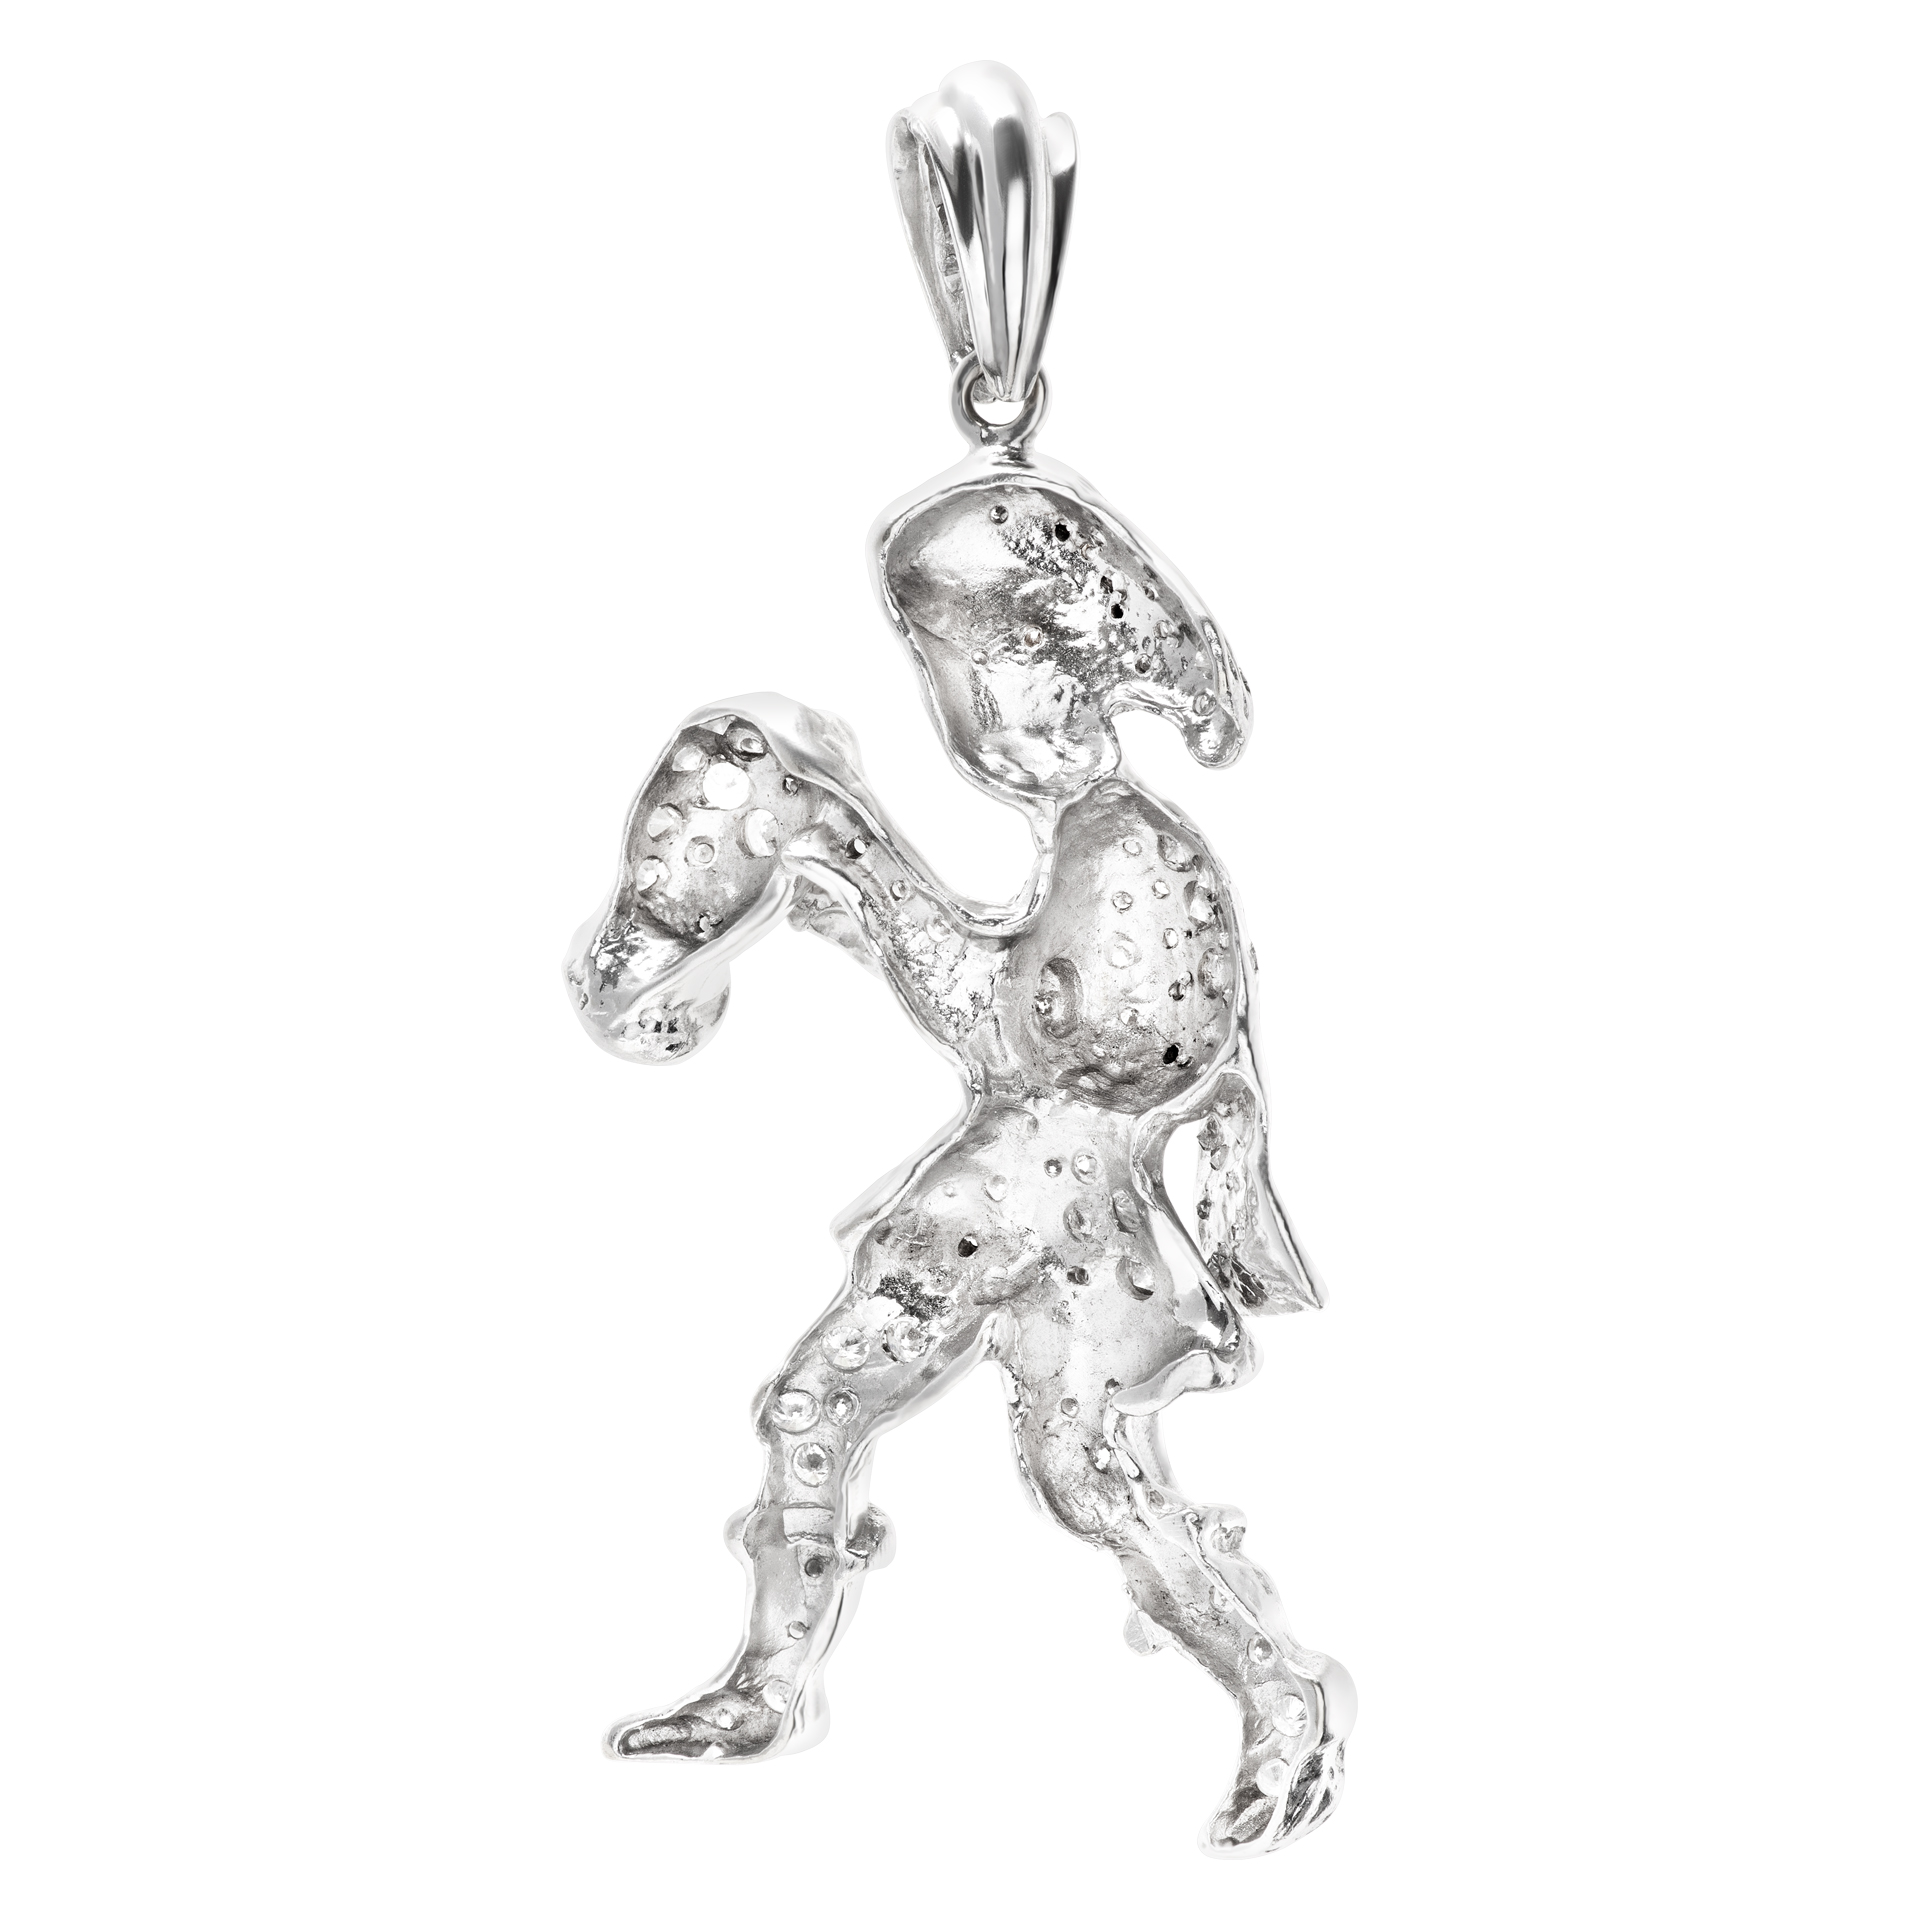 Zodiac Diamonds pendant Aquarius or the Water Bearer, in 14K white gold. Round brilliant cut diamonds total approx. weight: over 4.50 carats image 5